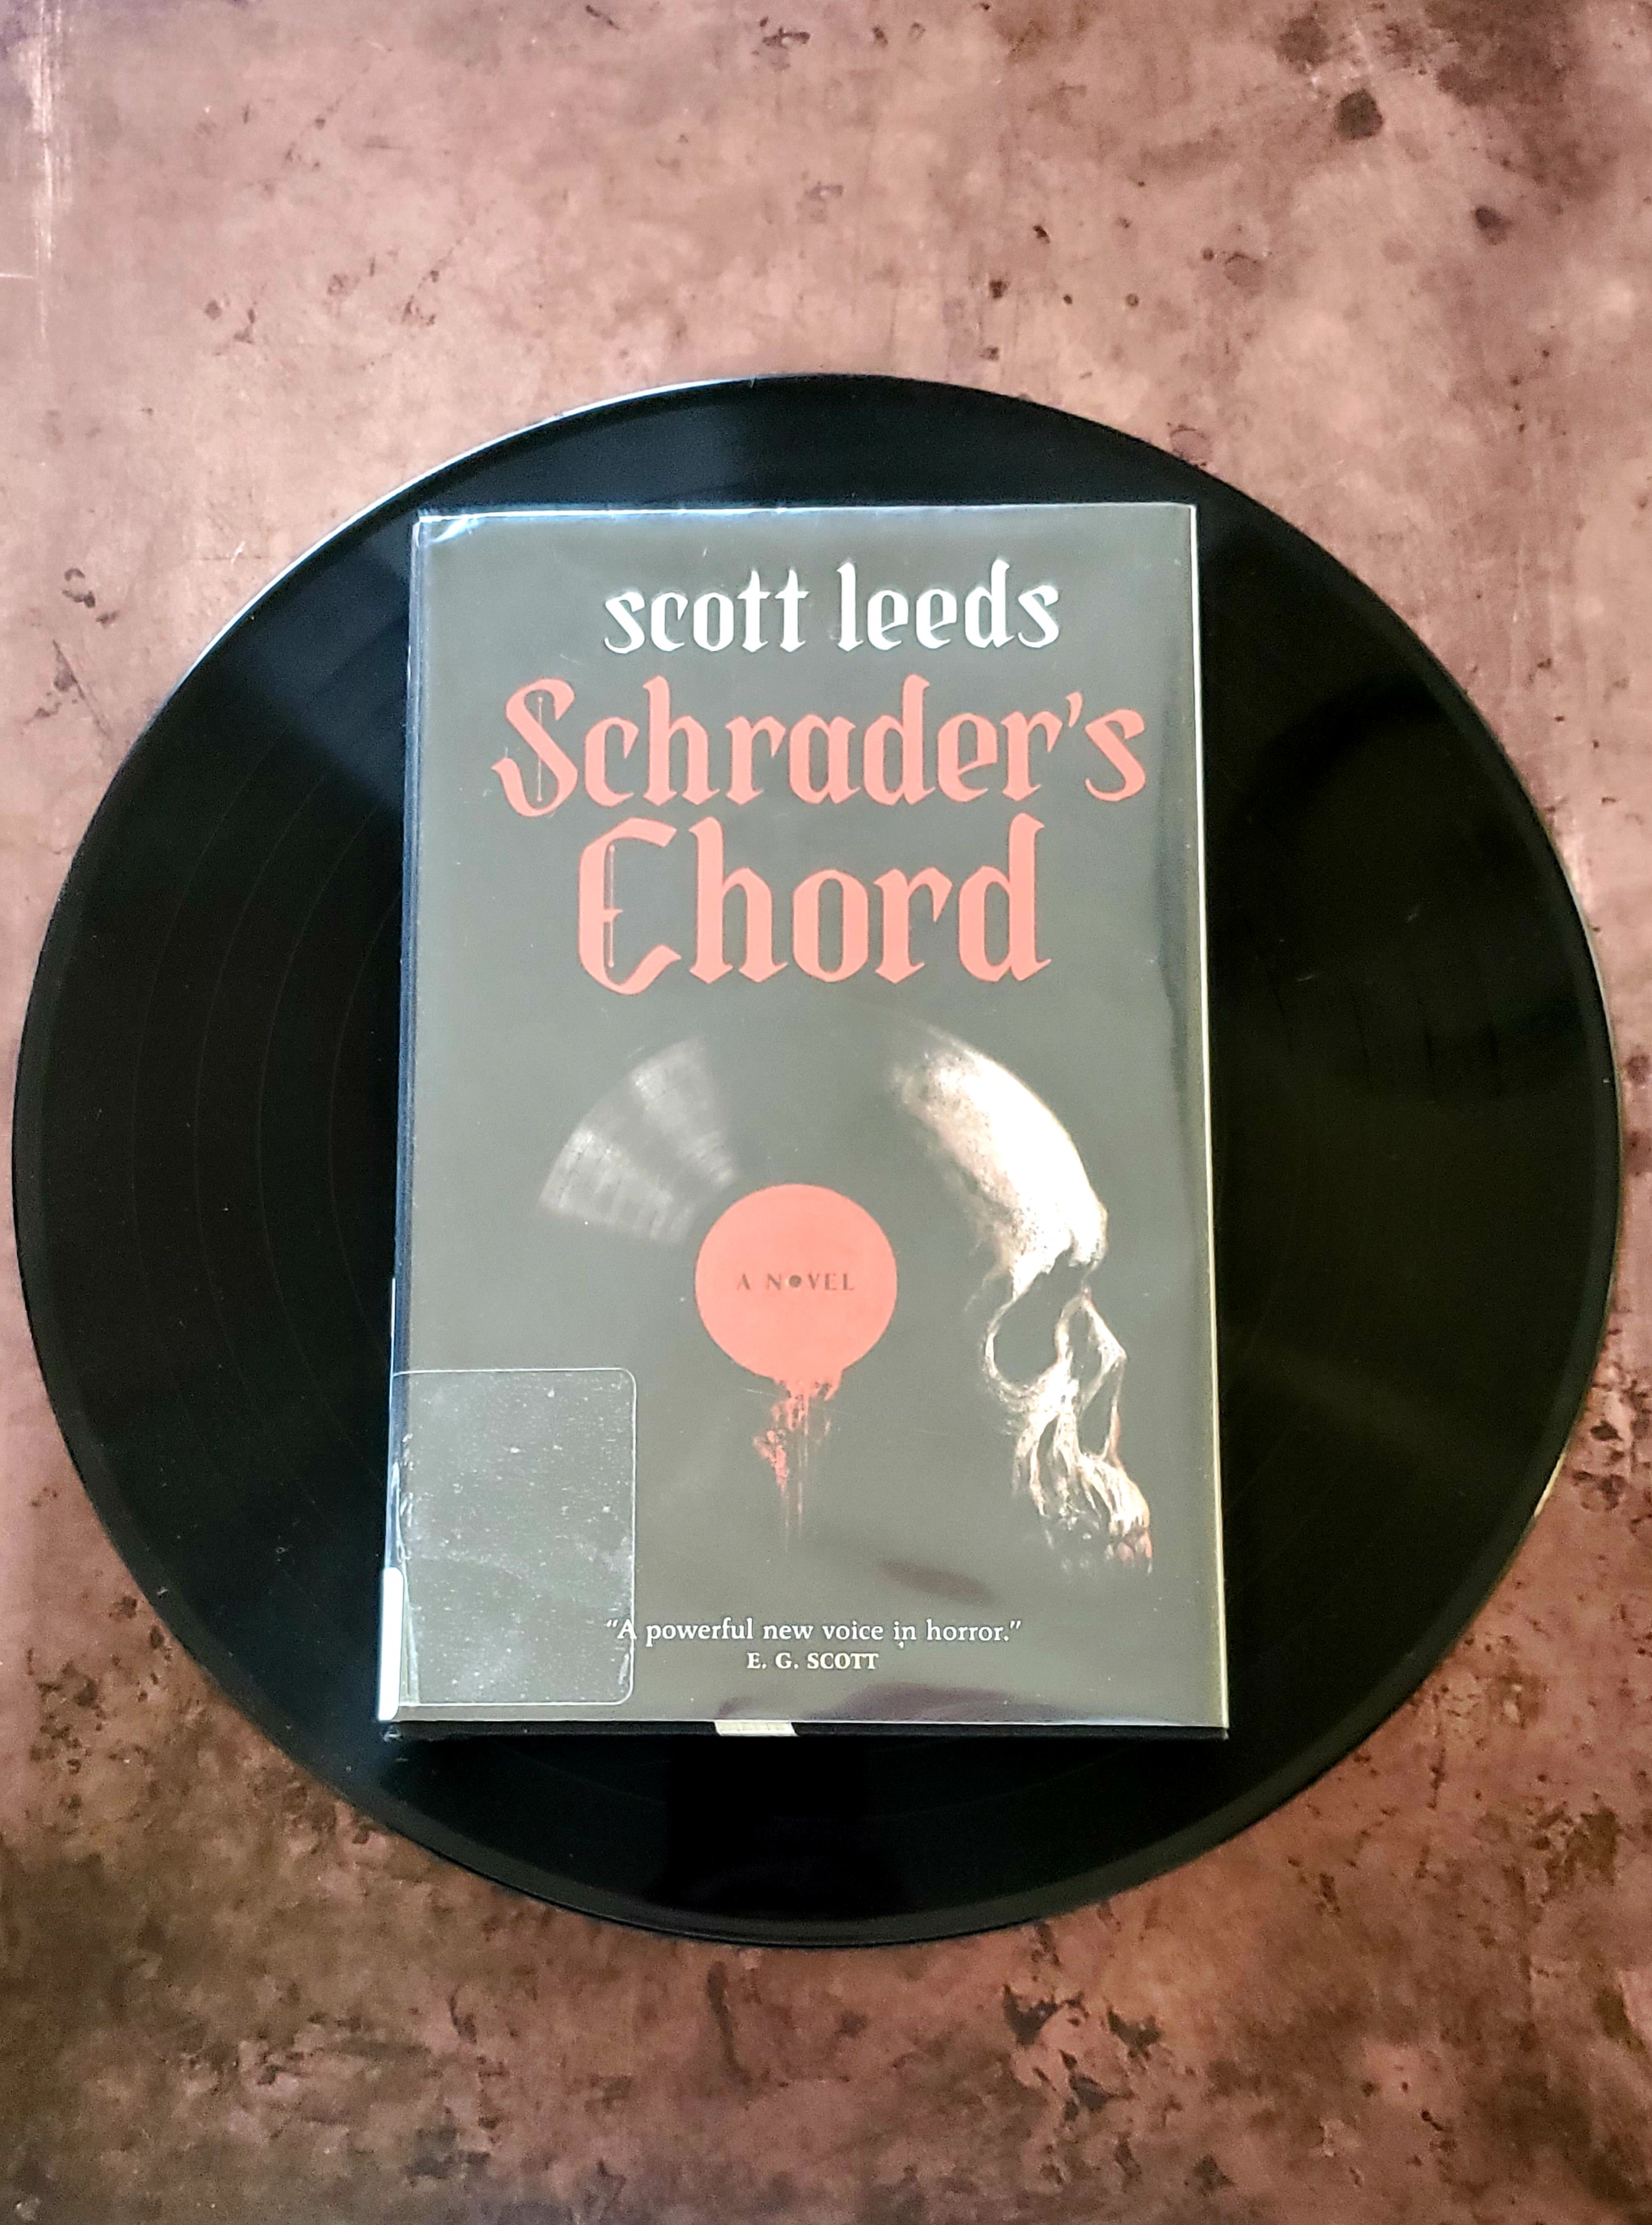 Podcast Book Club Discussion of SCHRADER’S CHORD